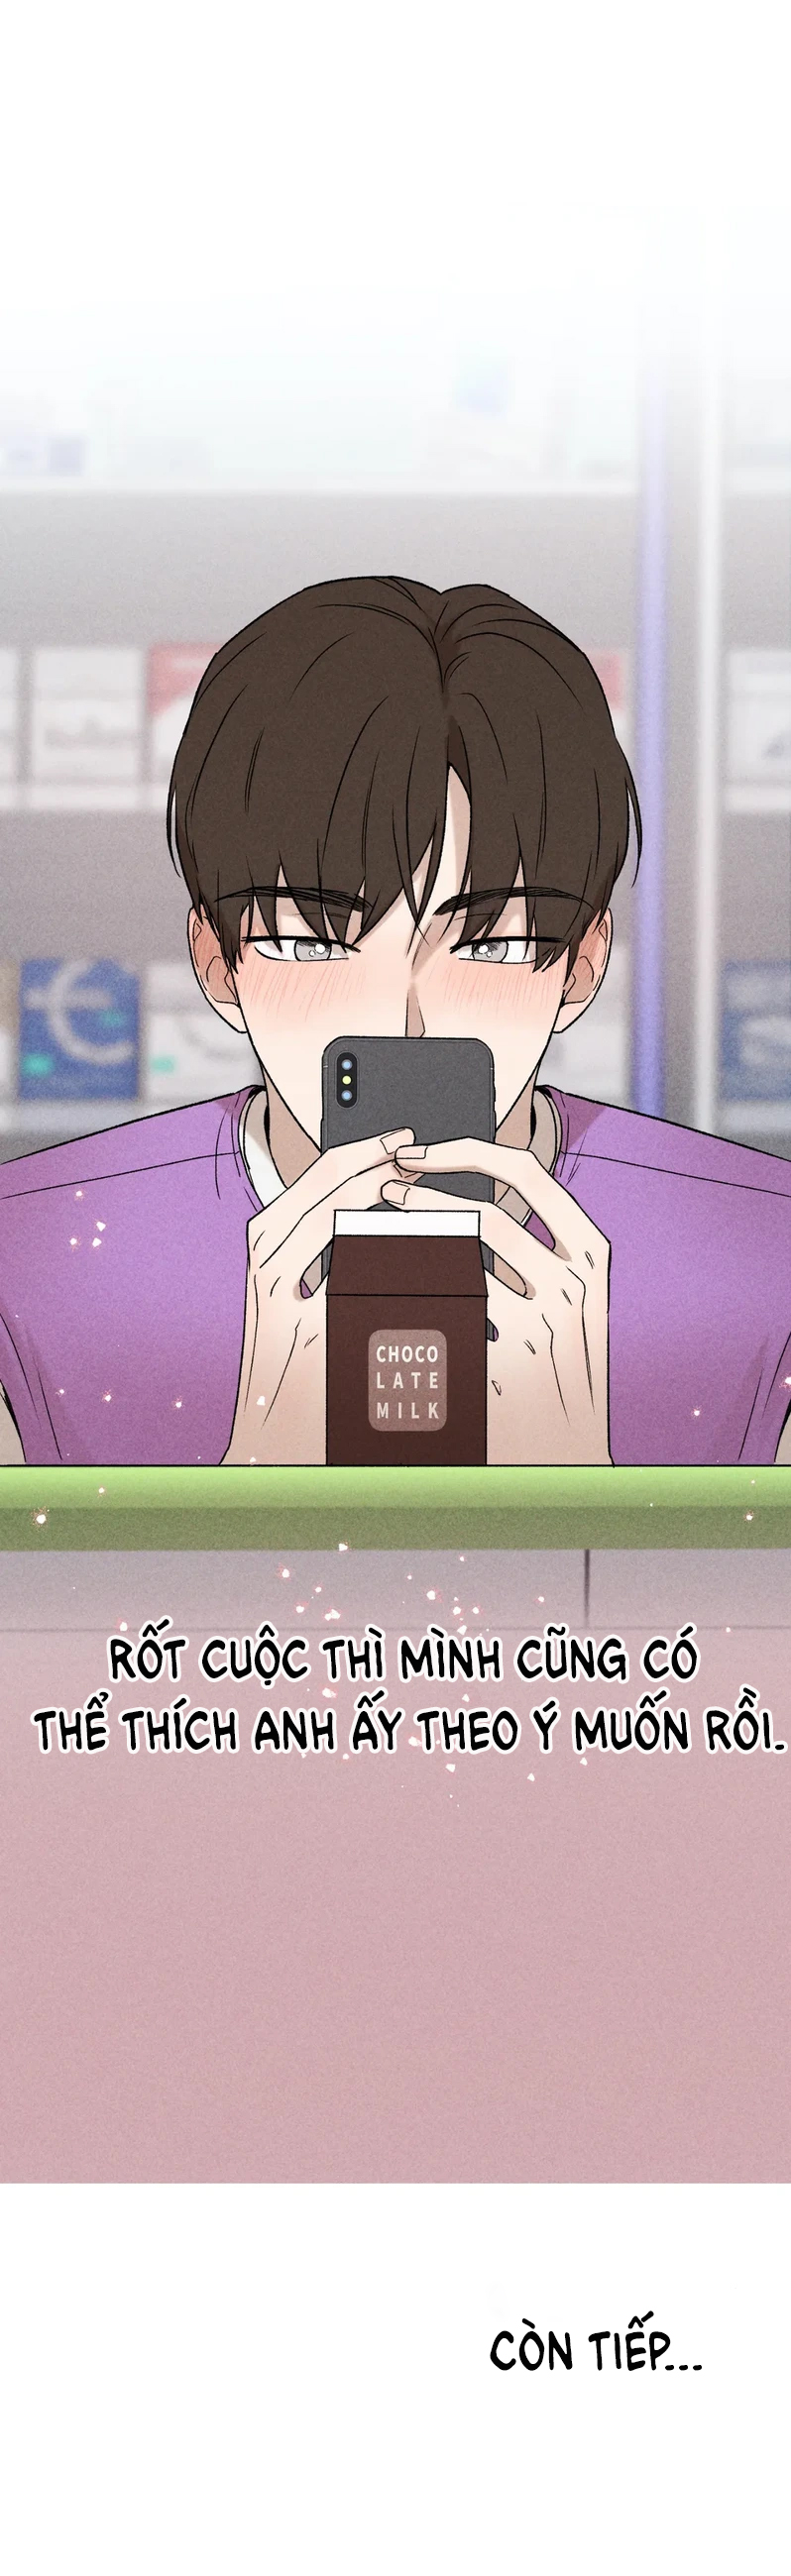 dung-cho-toi-hy-vong-chap-4-40